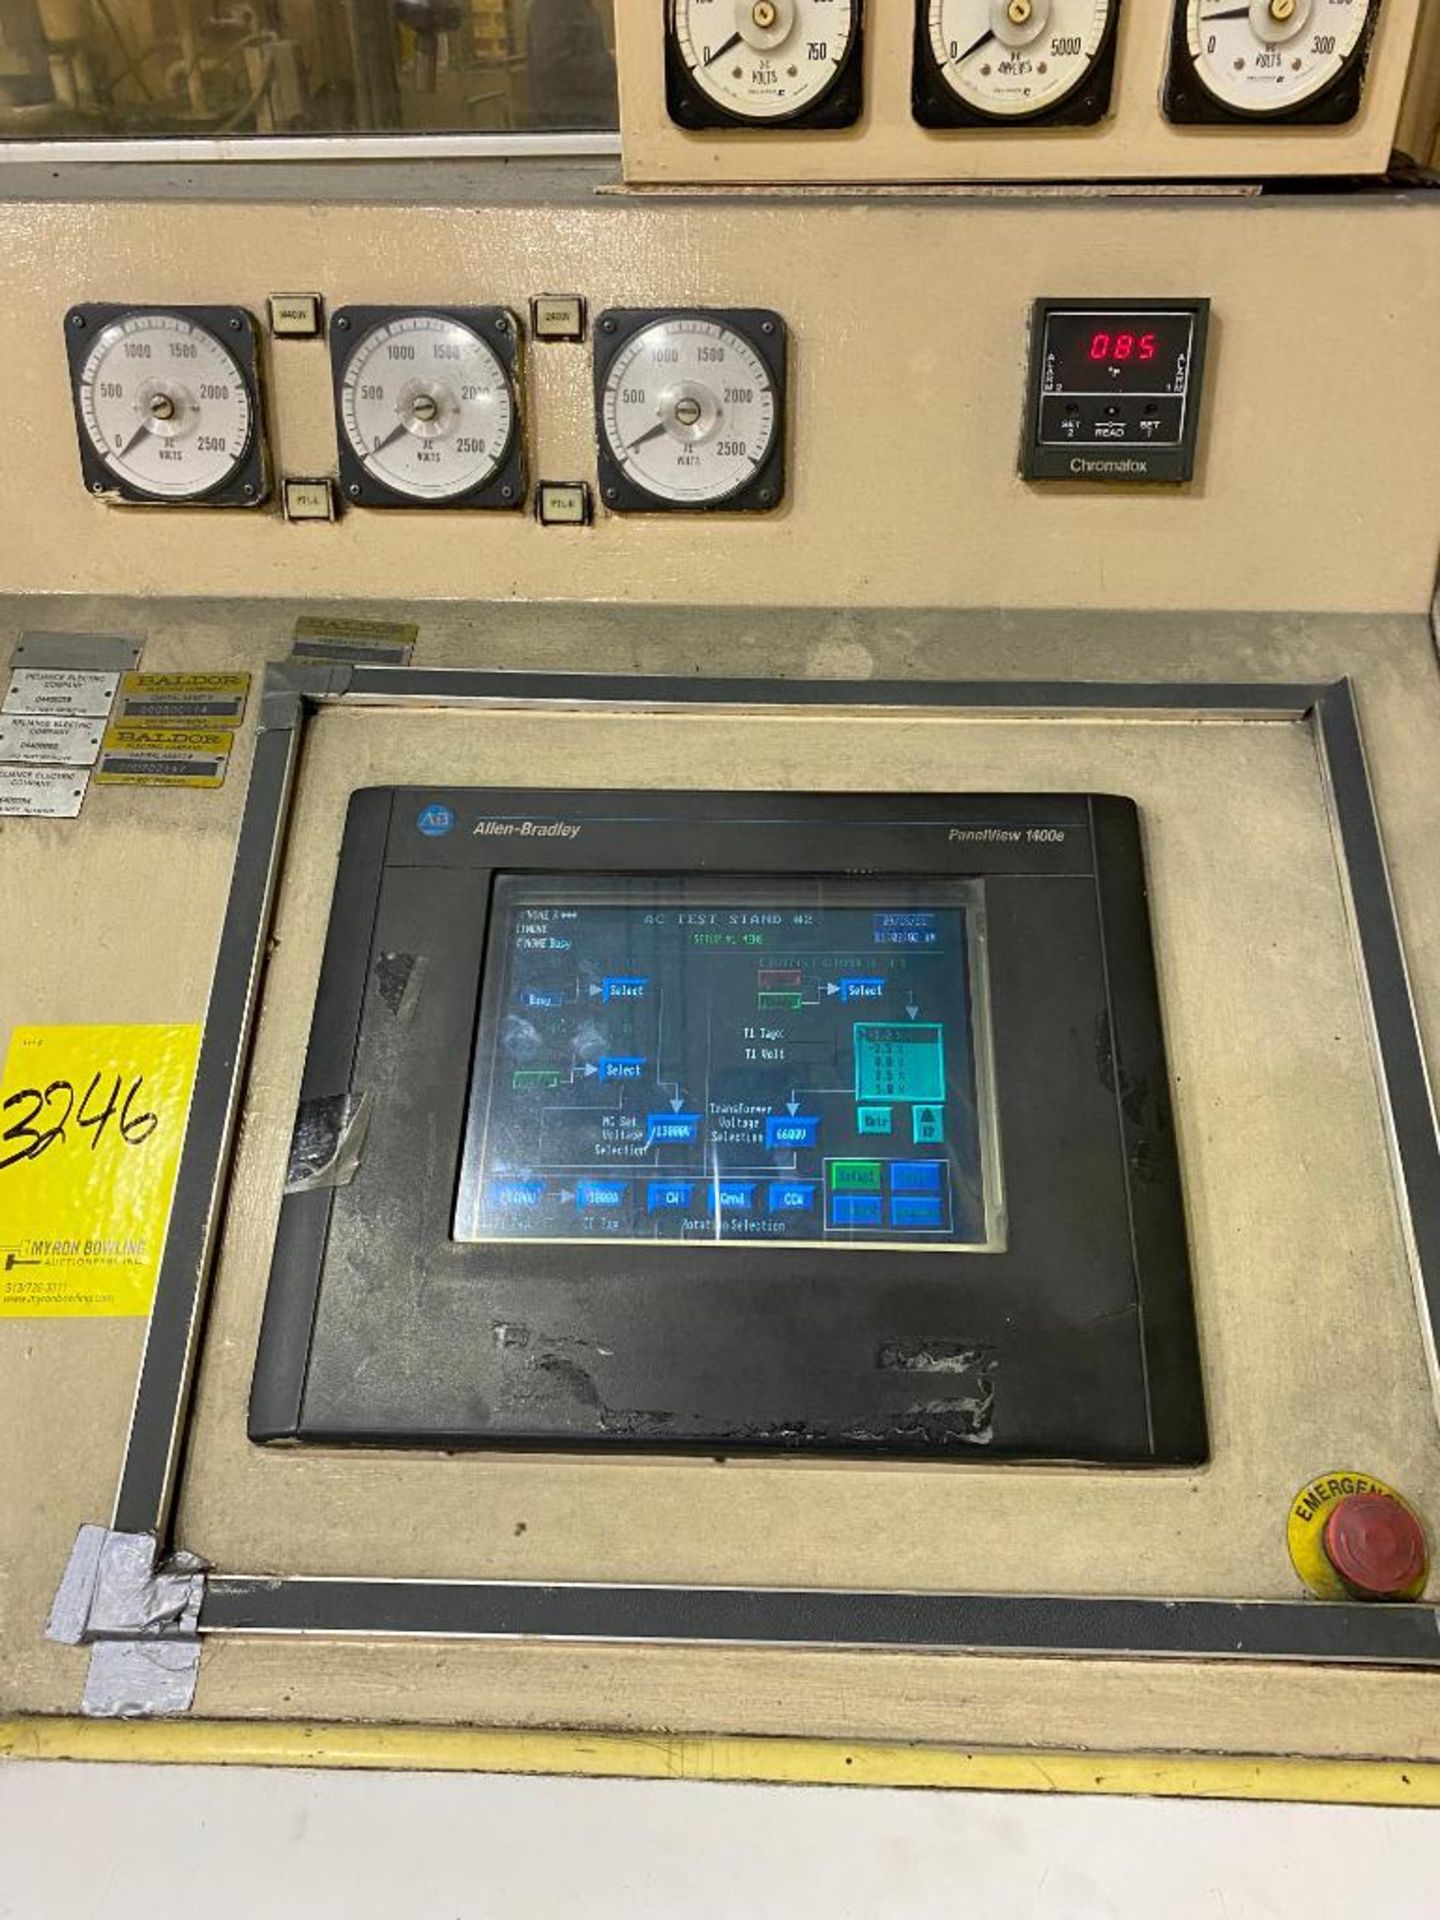 2,500 HP DYNOMOMETER DUAL MOTOR TEST STAND AC/DC #2, BENCH BOARD CONTROL STATION, ELECTRICAL ENCLOSU - Image 8 of 11